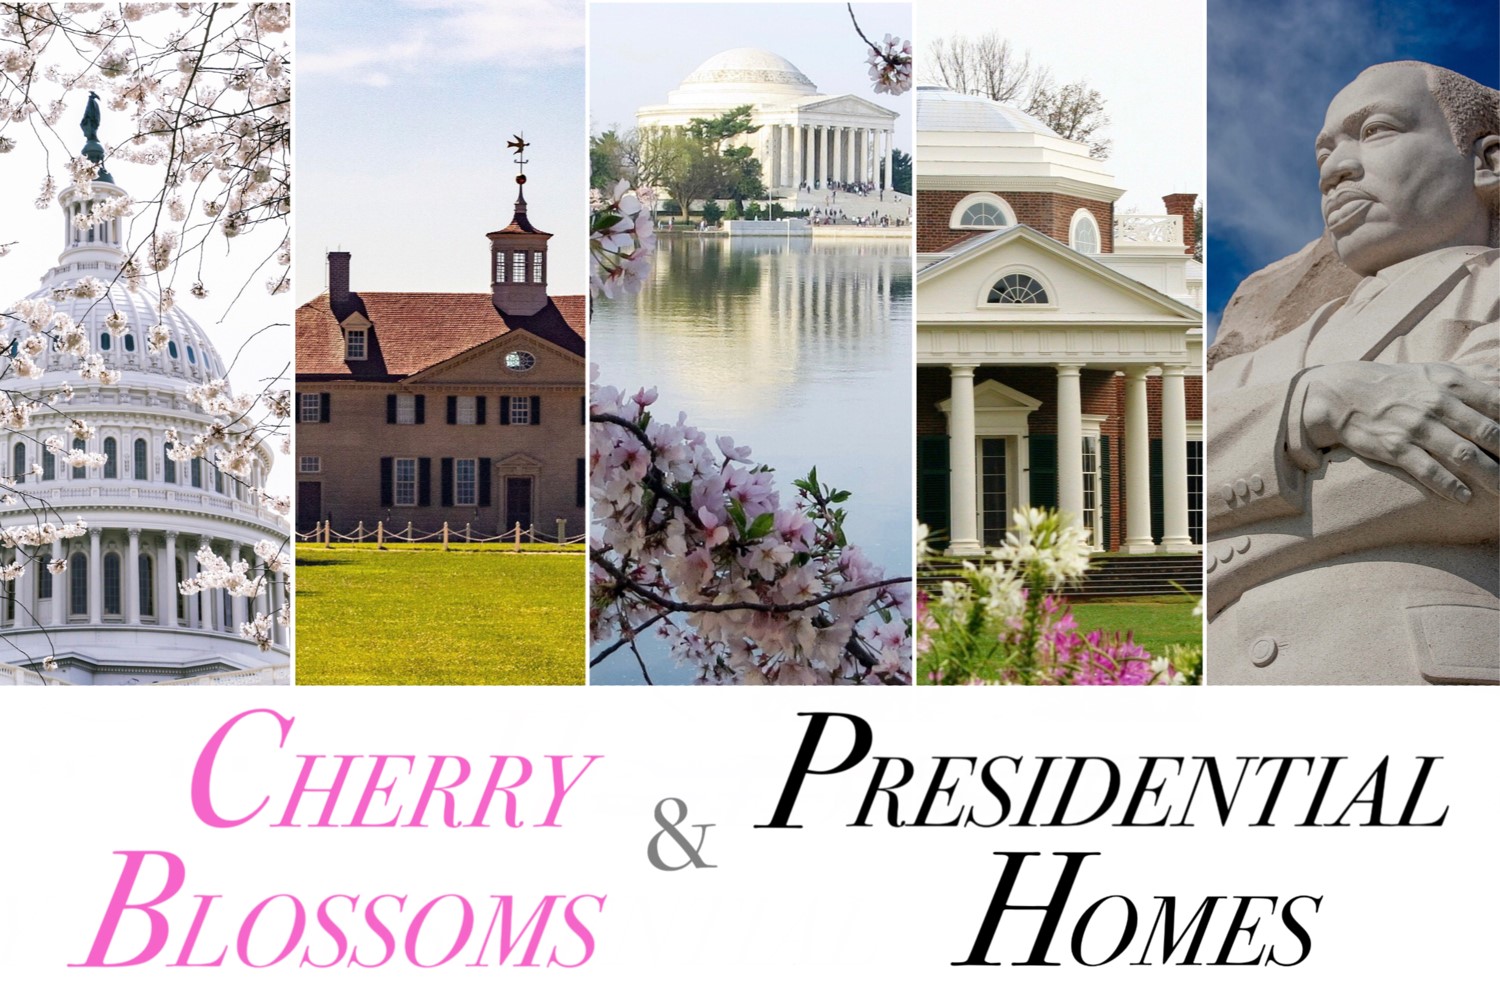 Cherry Blossoms & Presidential Homes - April 2 to April 6, 2023